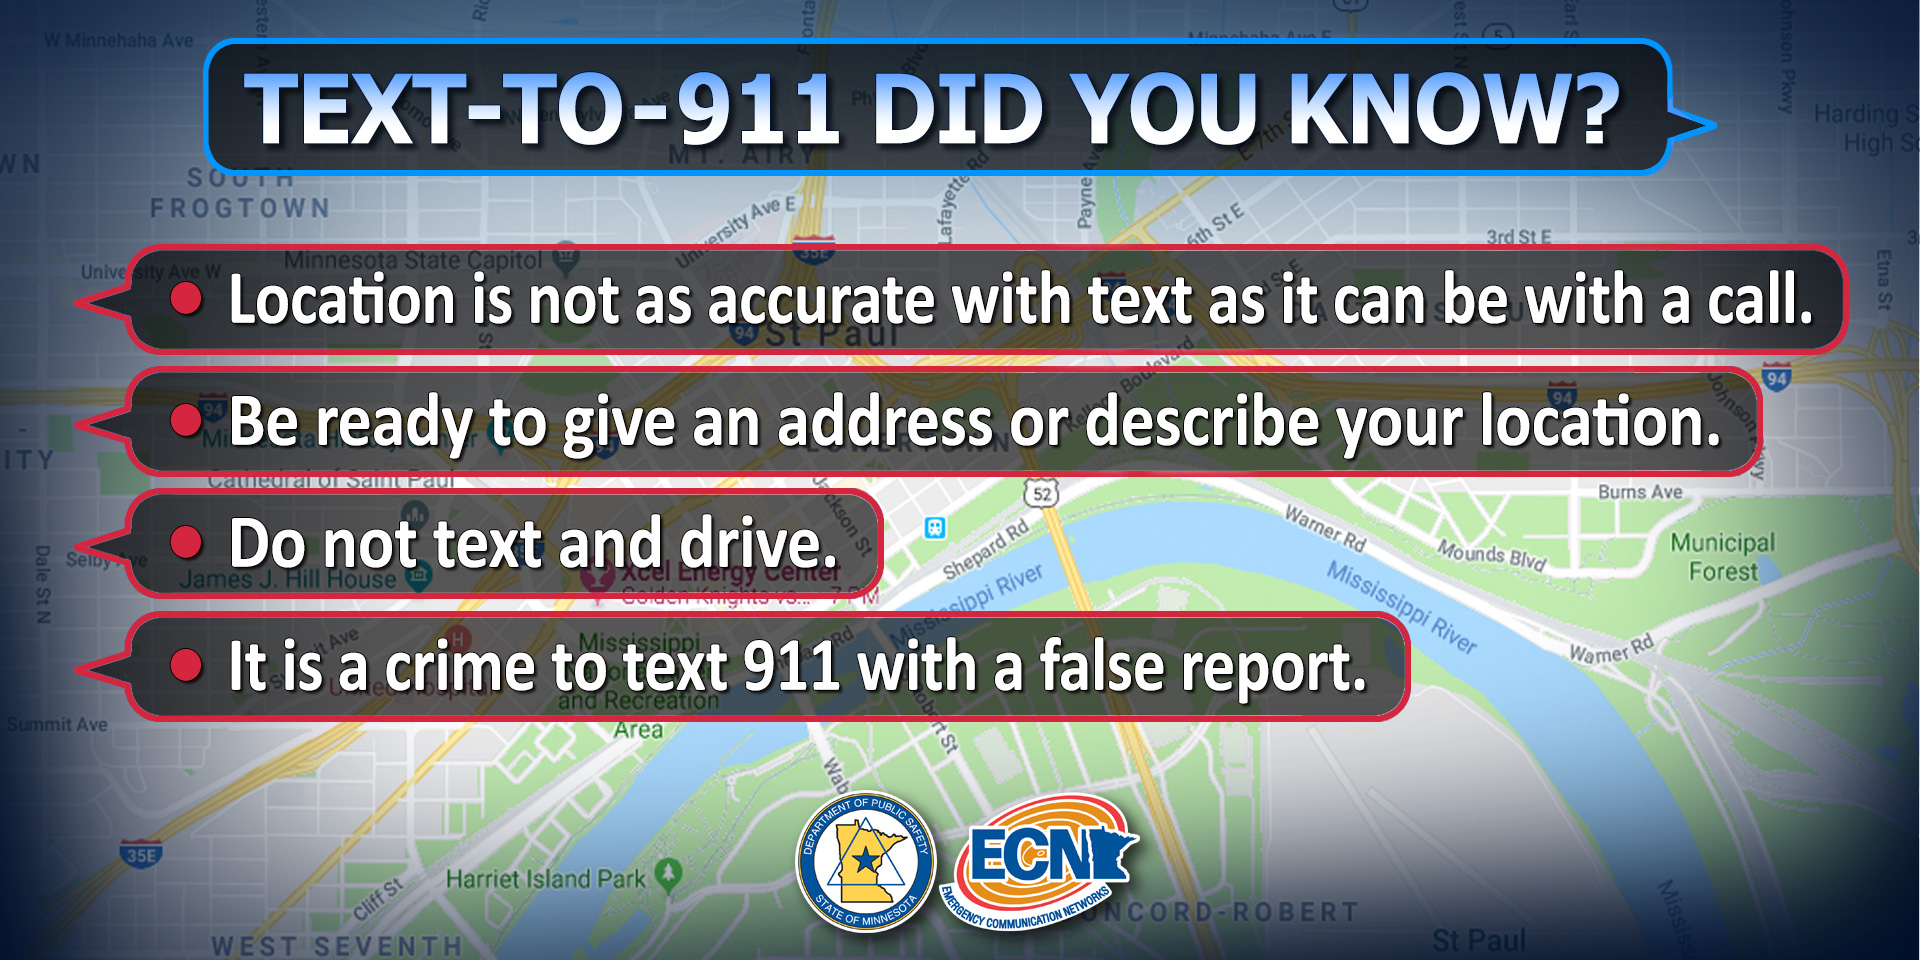 Text to 911 did you know graphic with information also provided on the web page.